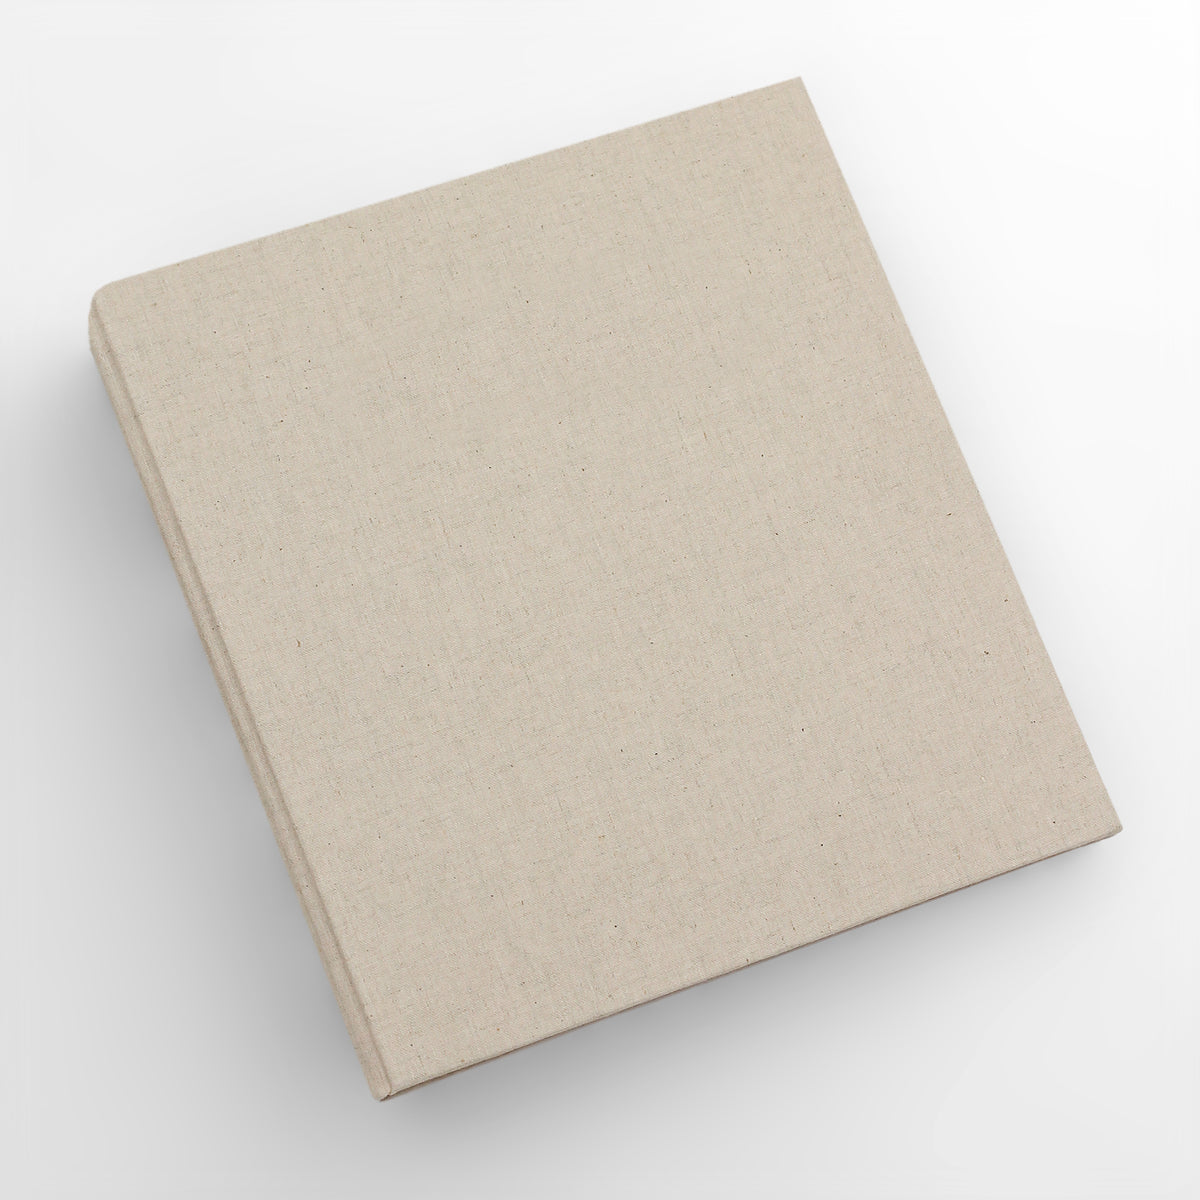 Large Photo Binder | for 8x10 Photos | with Natural Linen Cover